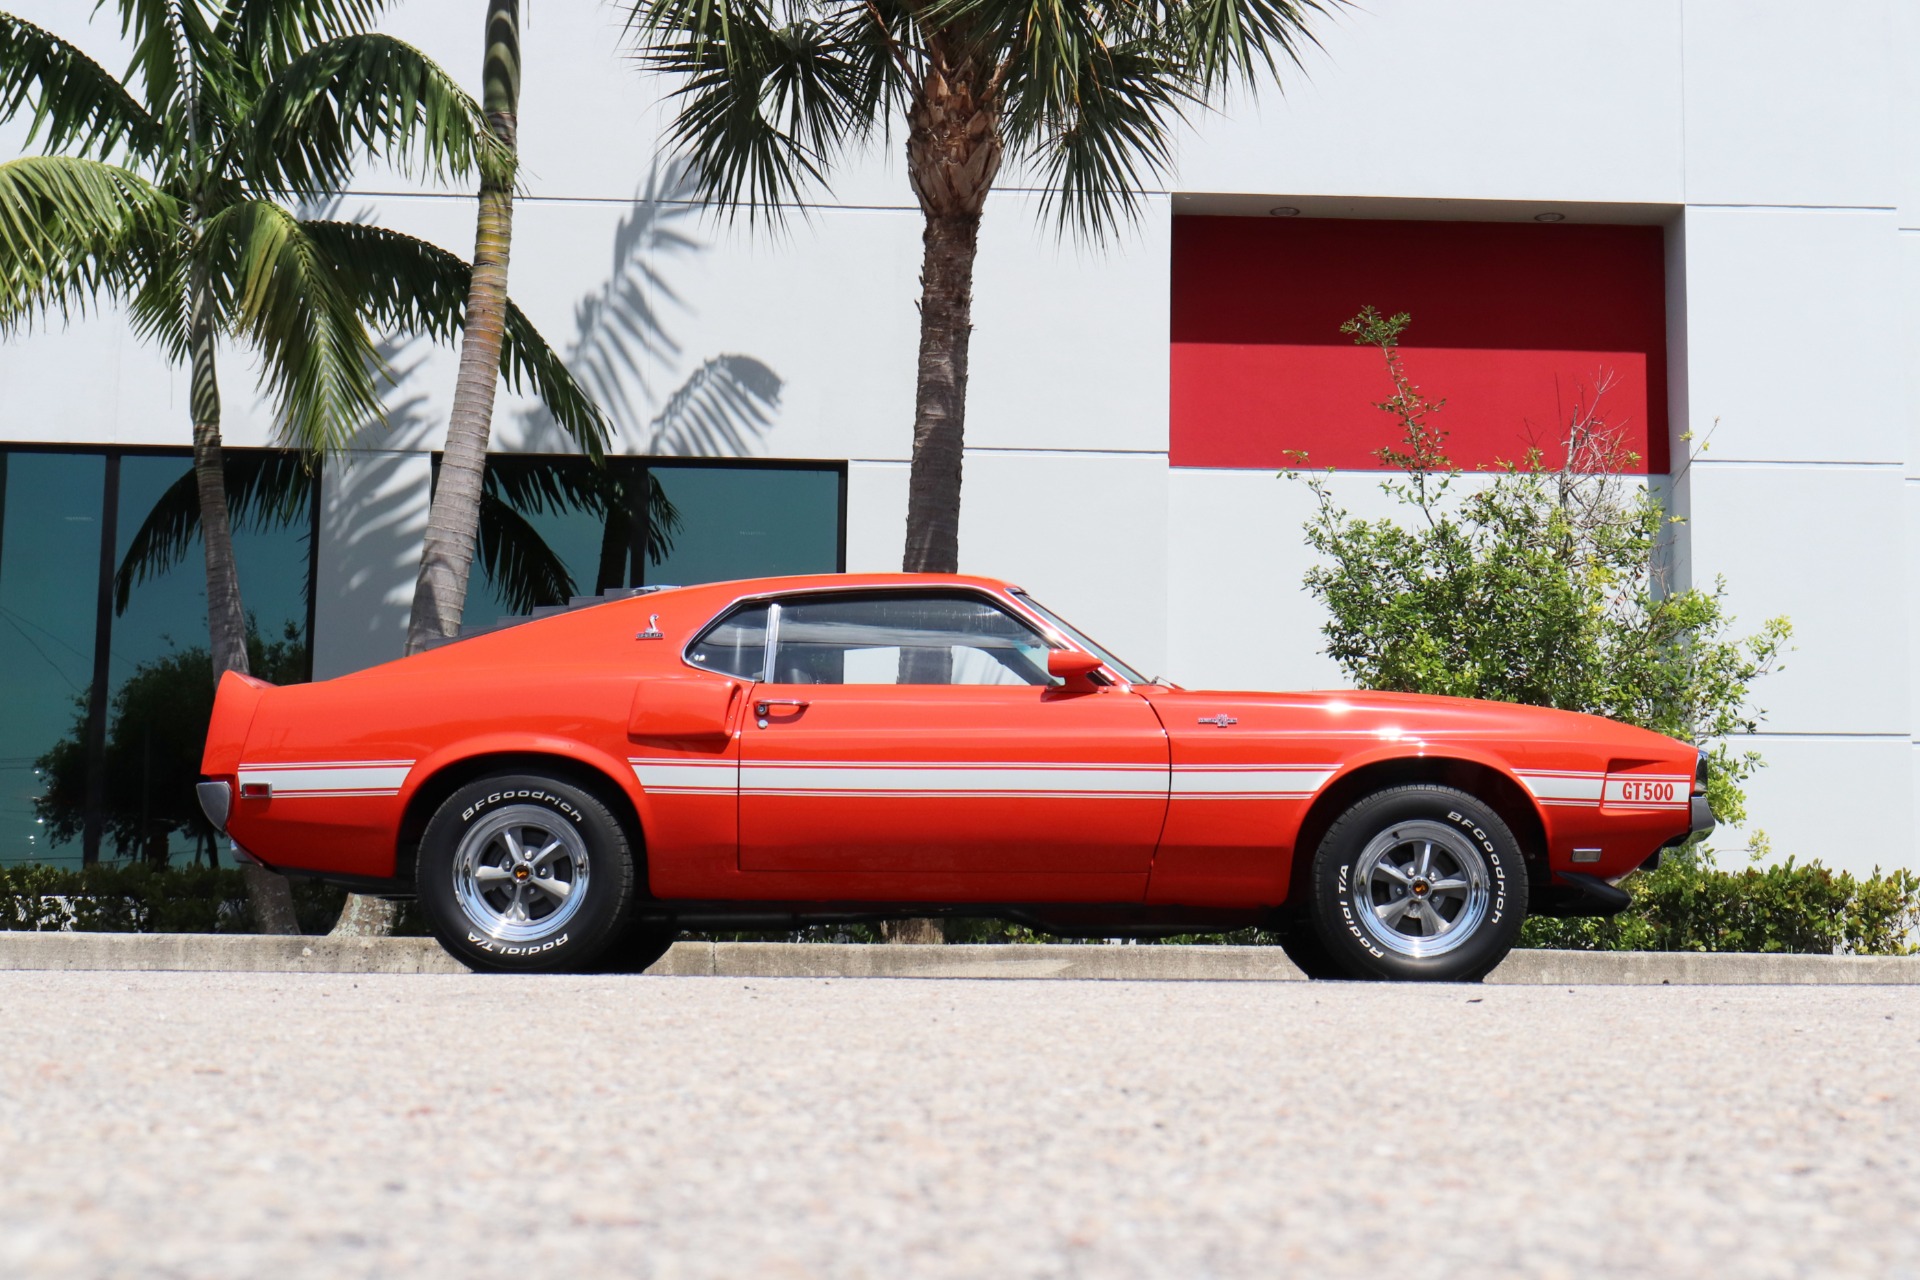 A Used 1969 Ford Shelby Mustang GT500 is a collector's dream near Fort Lauderdale FL